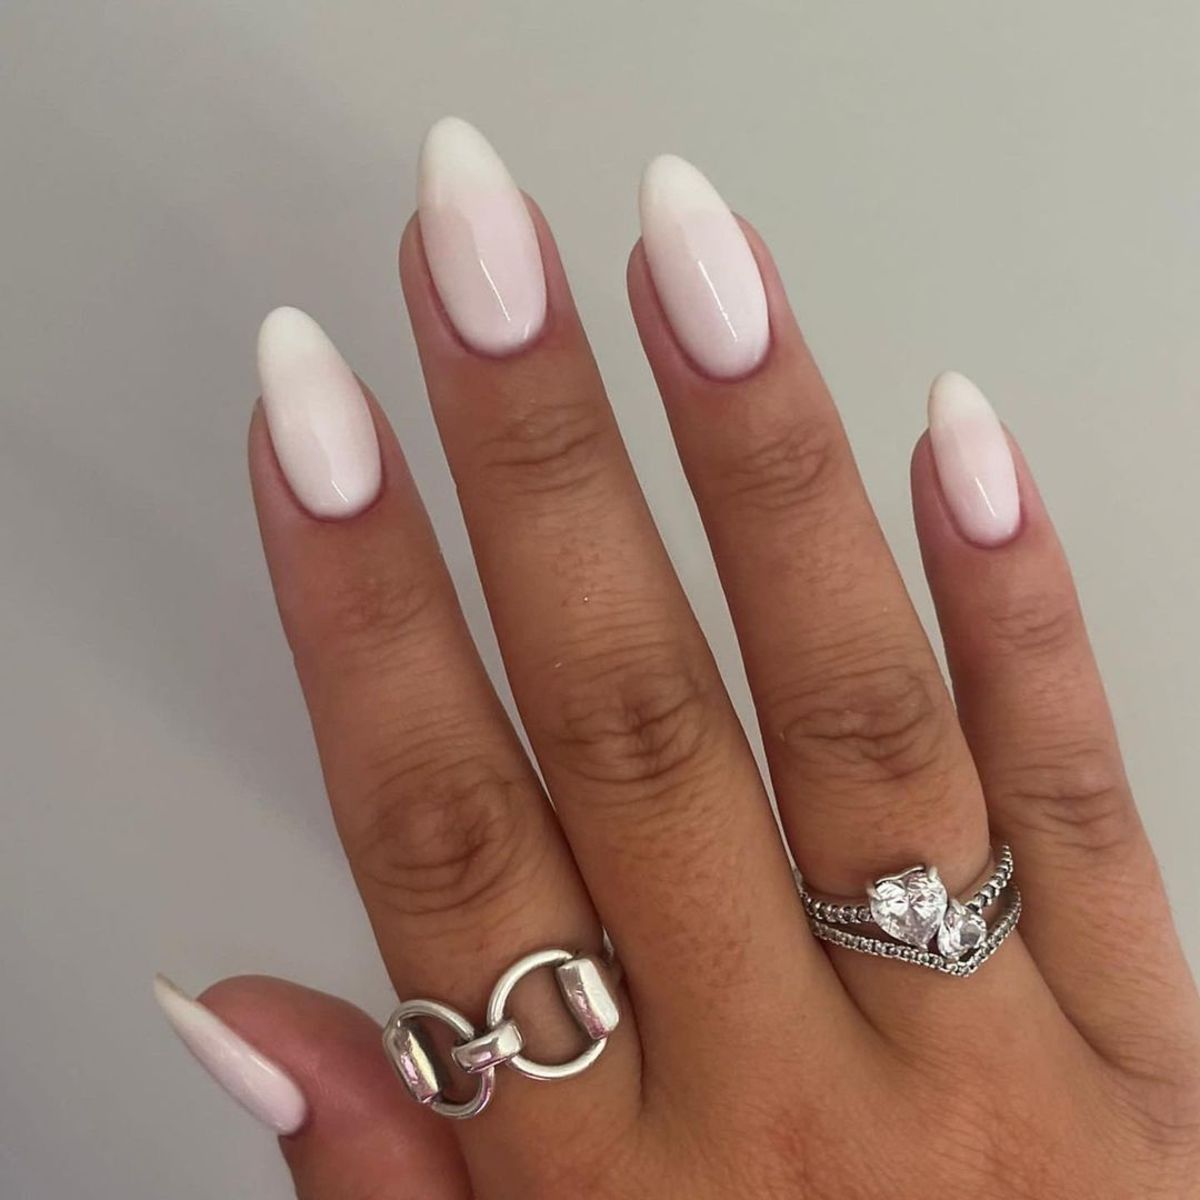 17 Wedding Nail Ideas to Screenshot Before Your Big Day - Fashionista